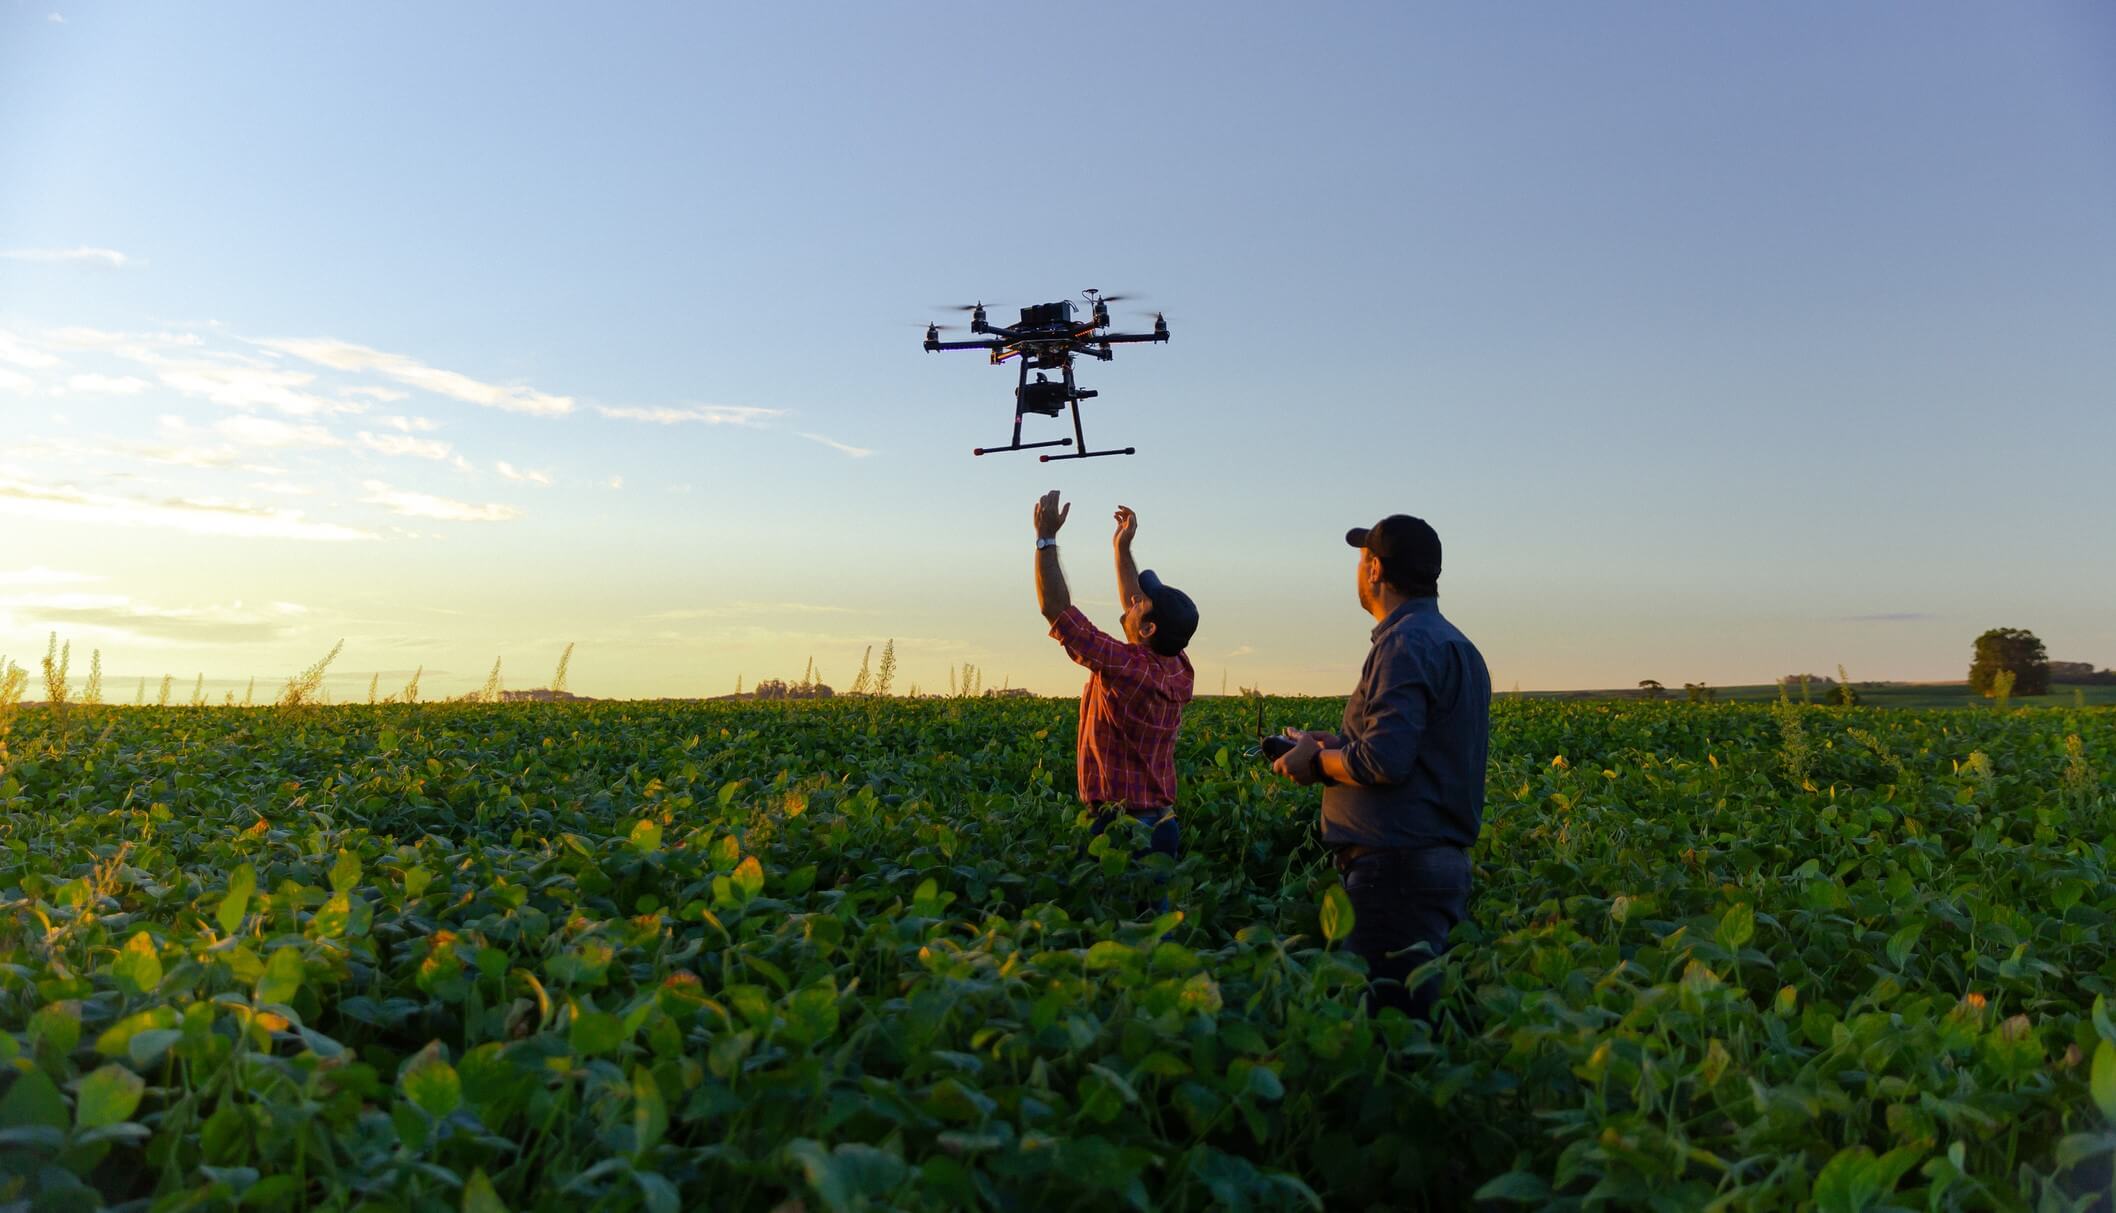 person operating drone in agricultural landscape